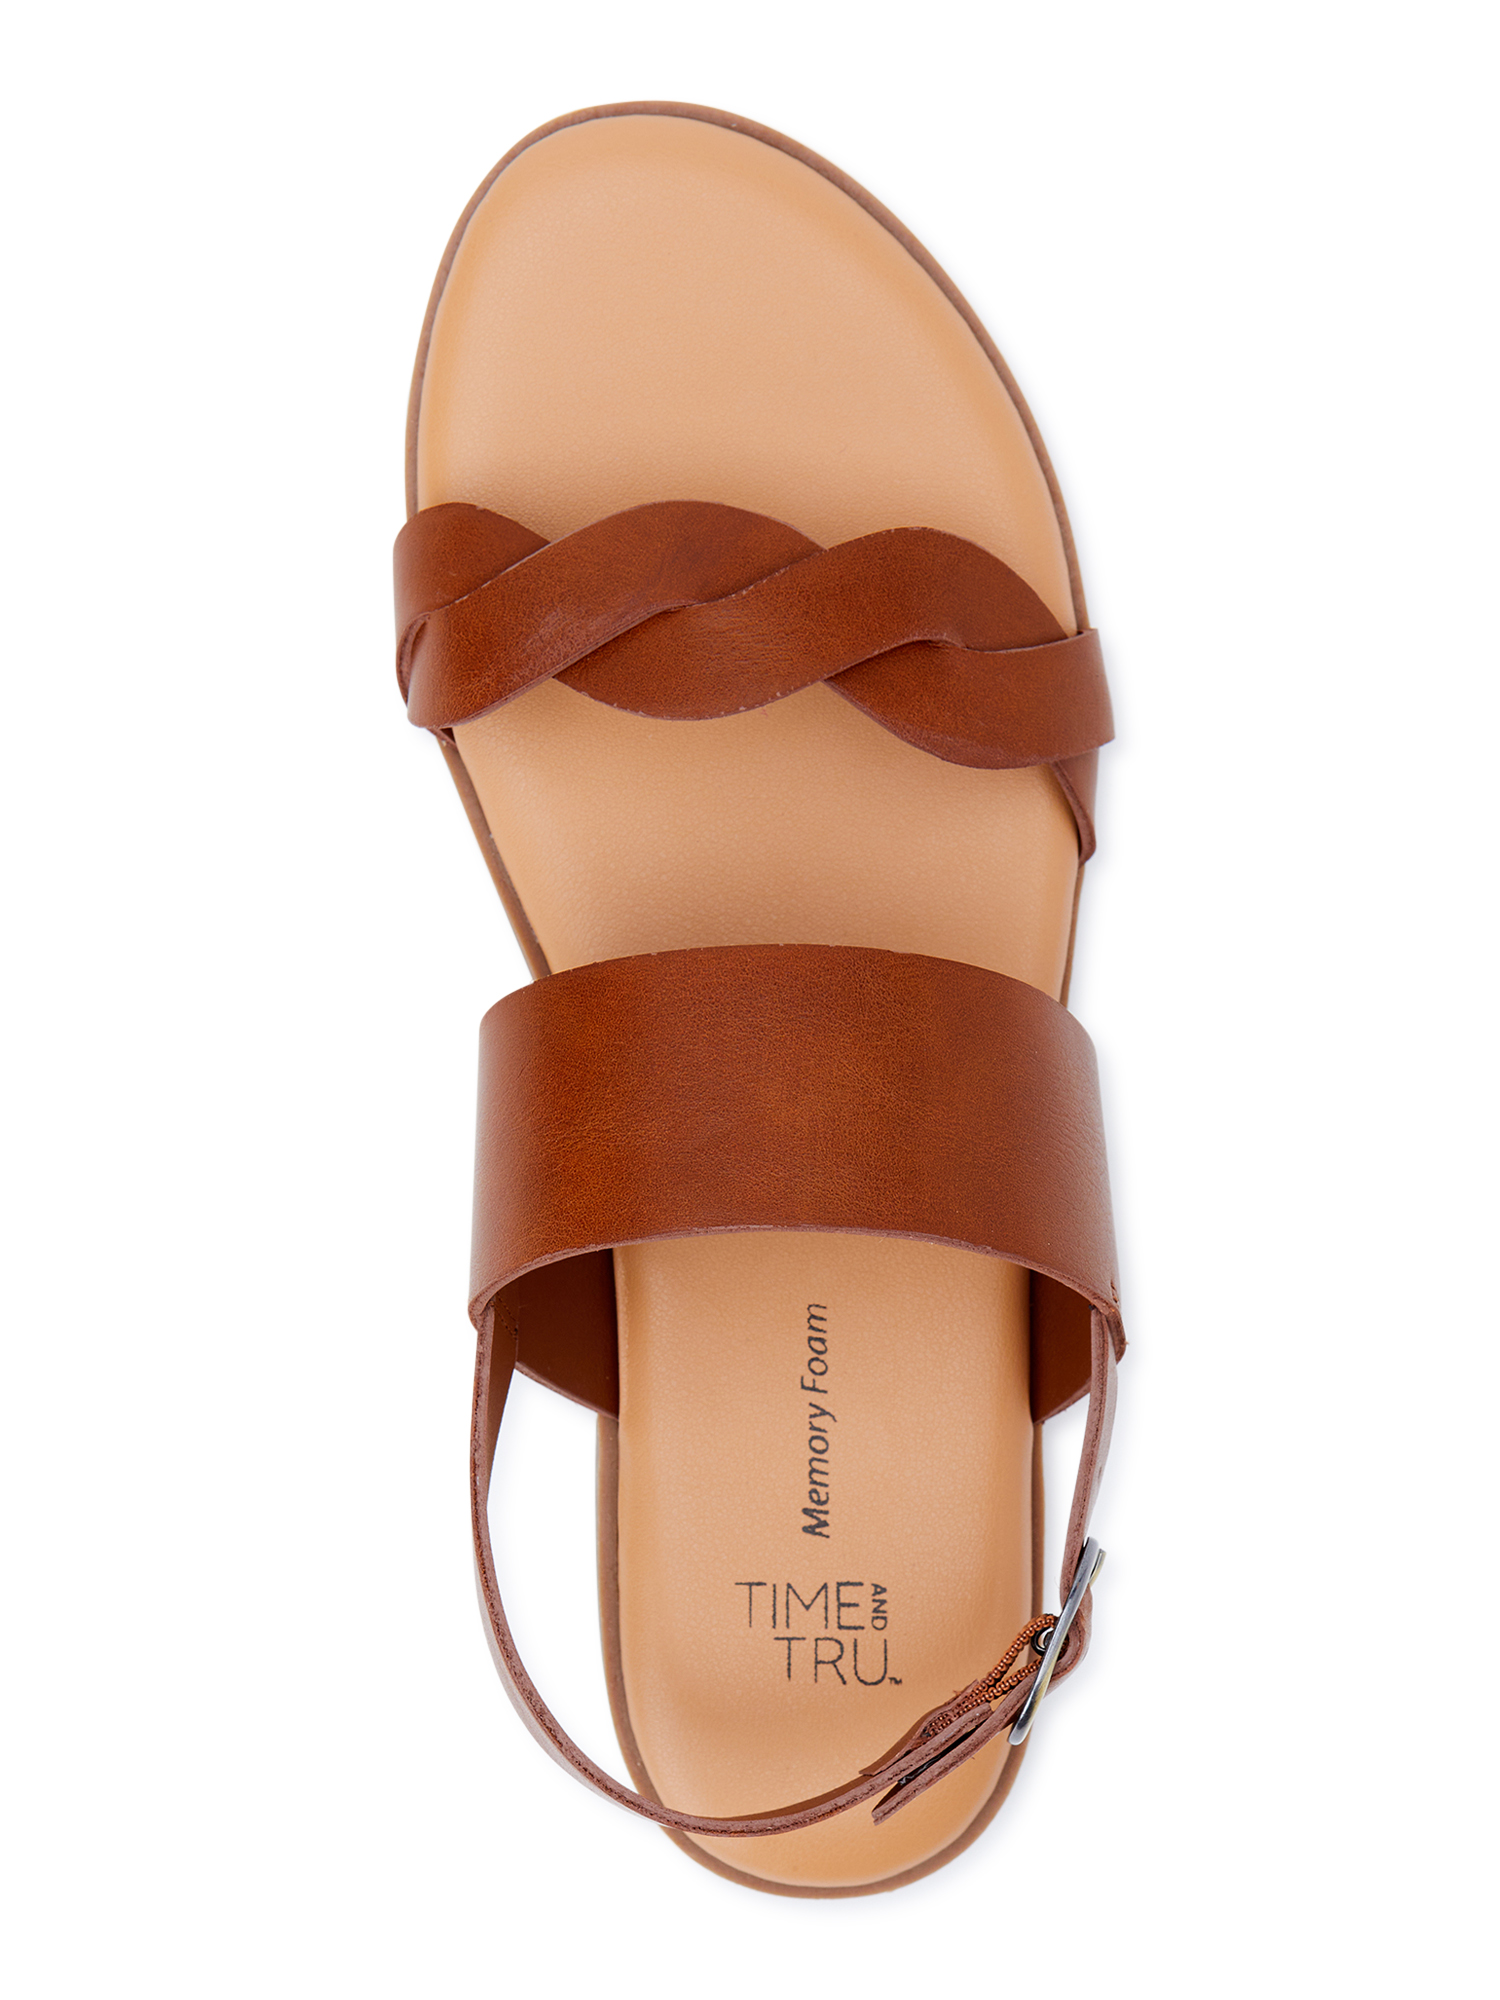 Time and Tru Women's Twist Strap Sandals - image 4 of 5